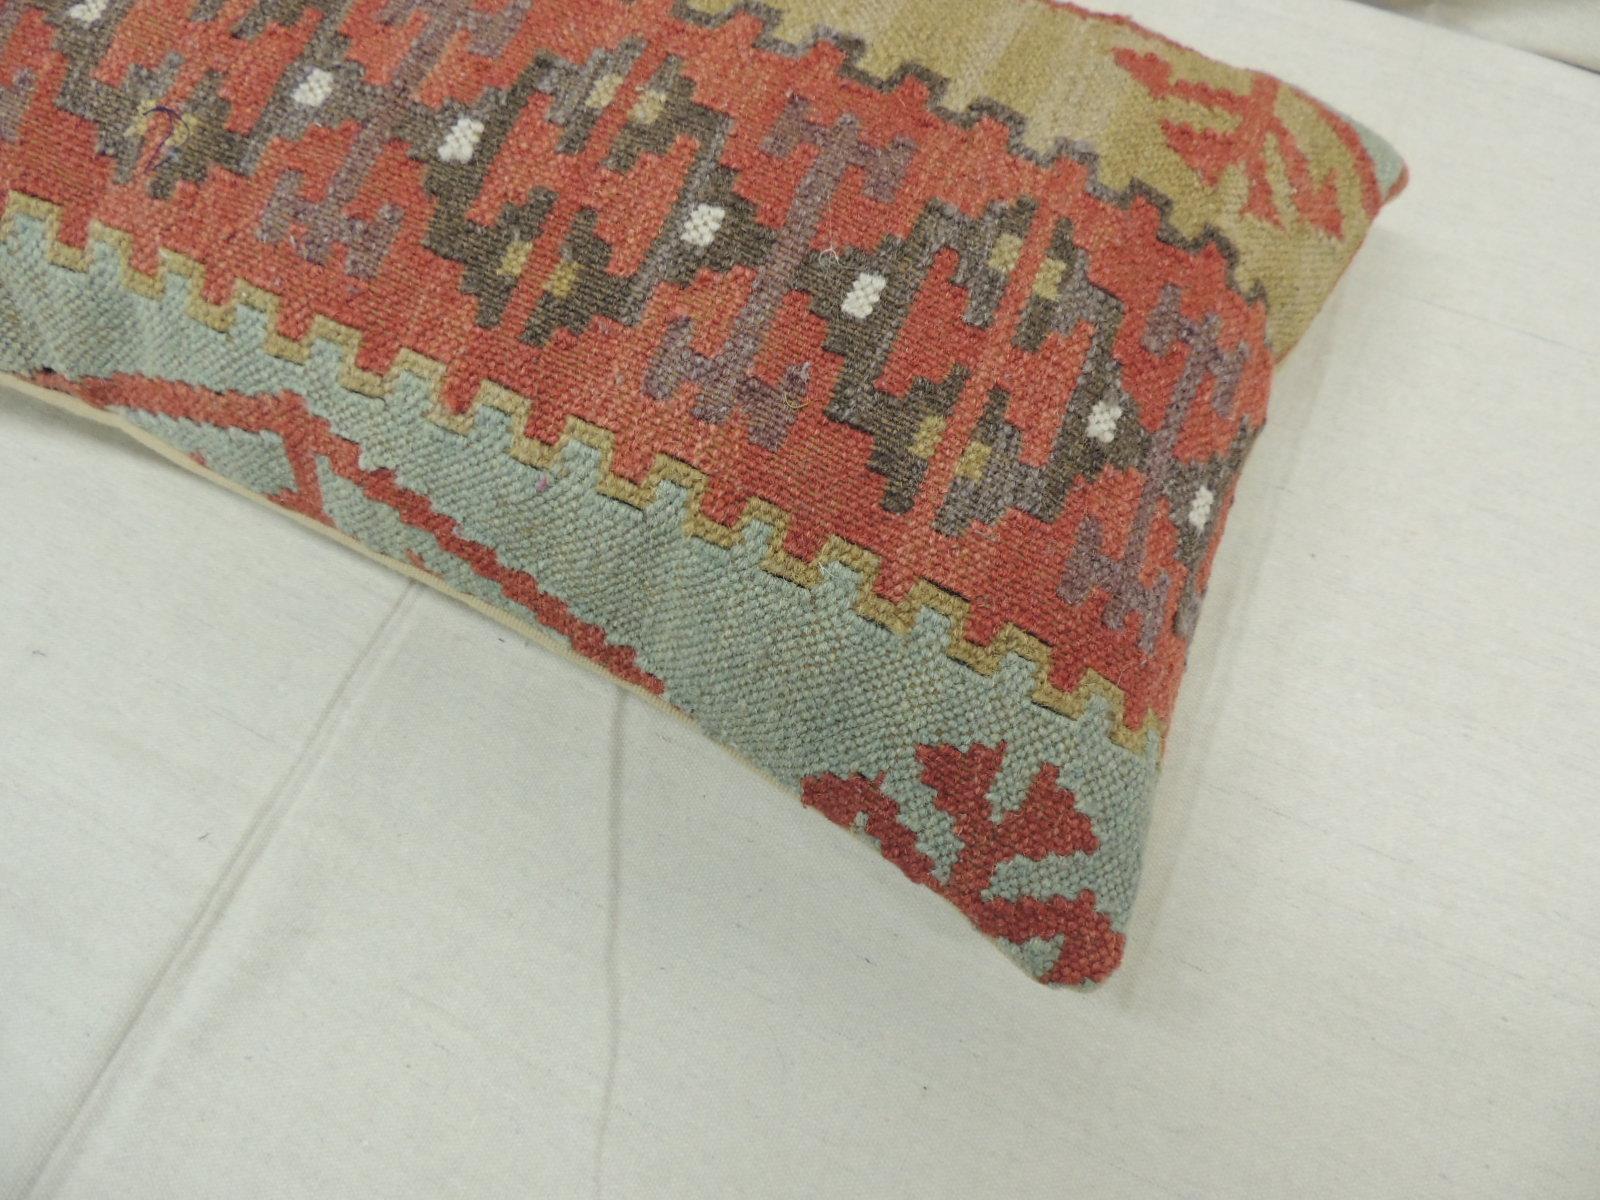 Hand-Crafted Rust and Blue Woven Kilim Decorative Bolster Pillow